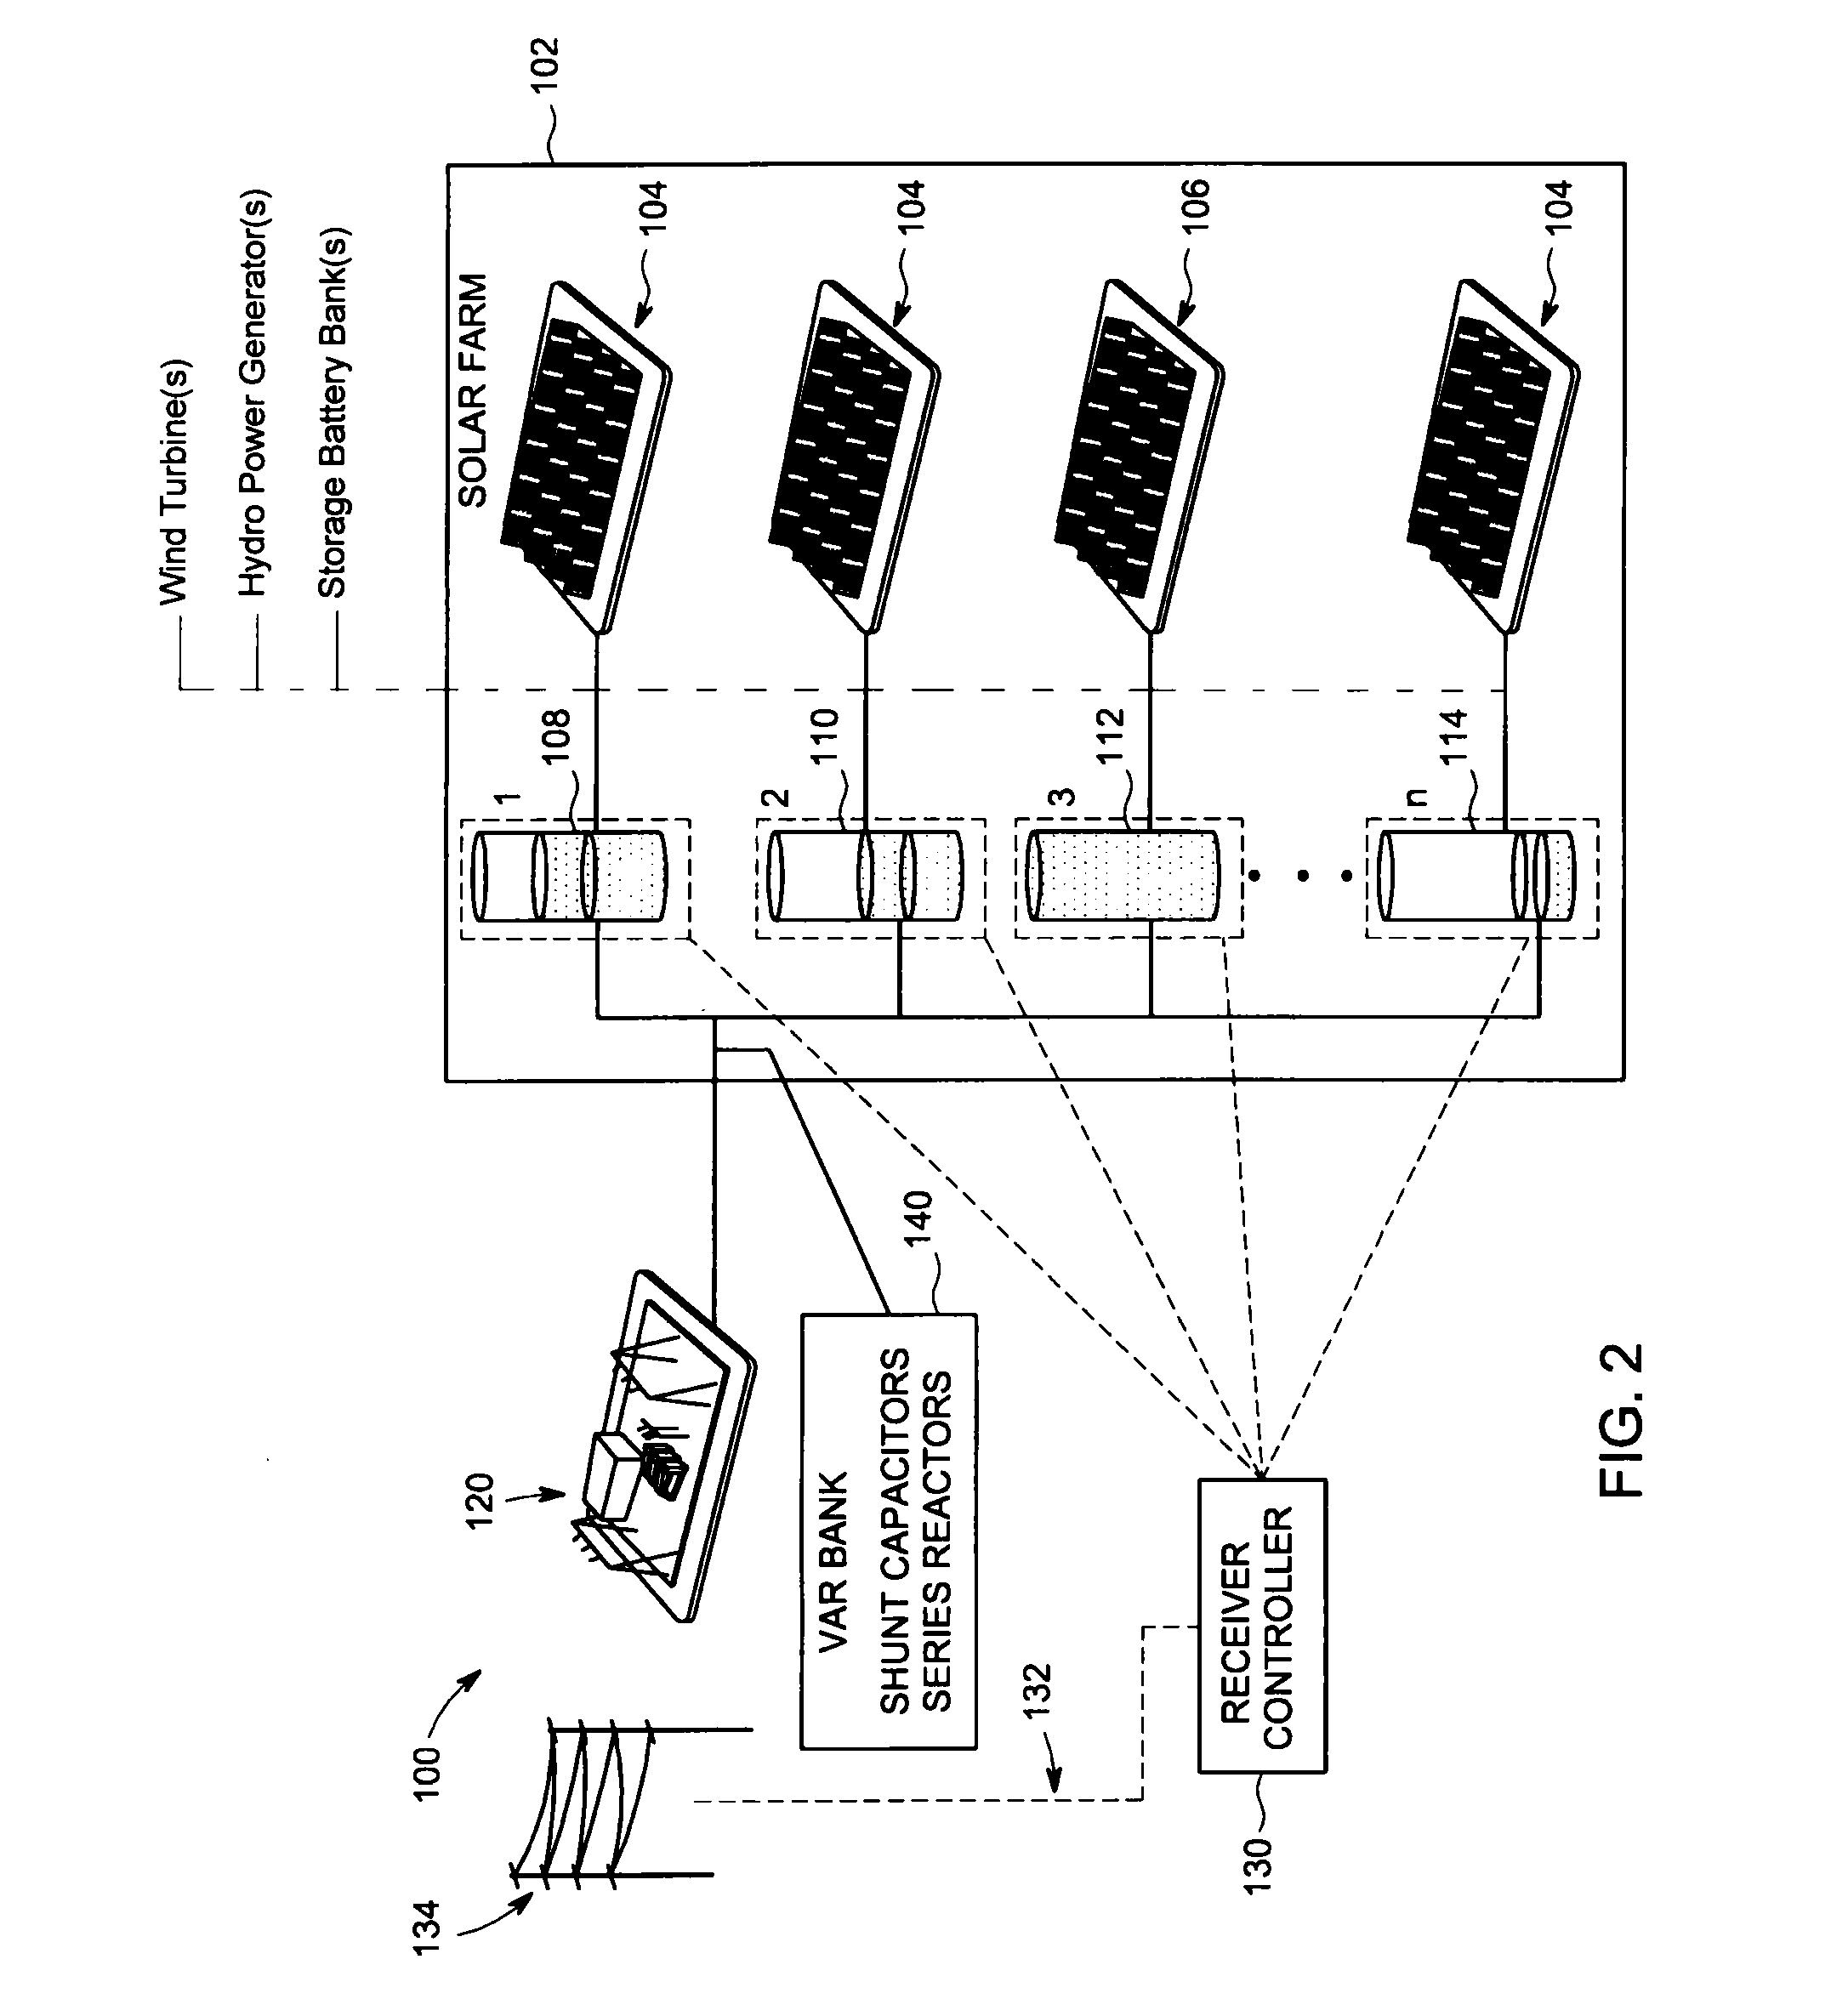 System and method for determining potential power of inverters during curtailment mode